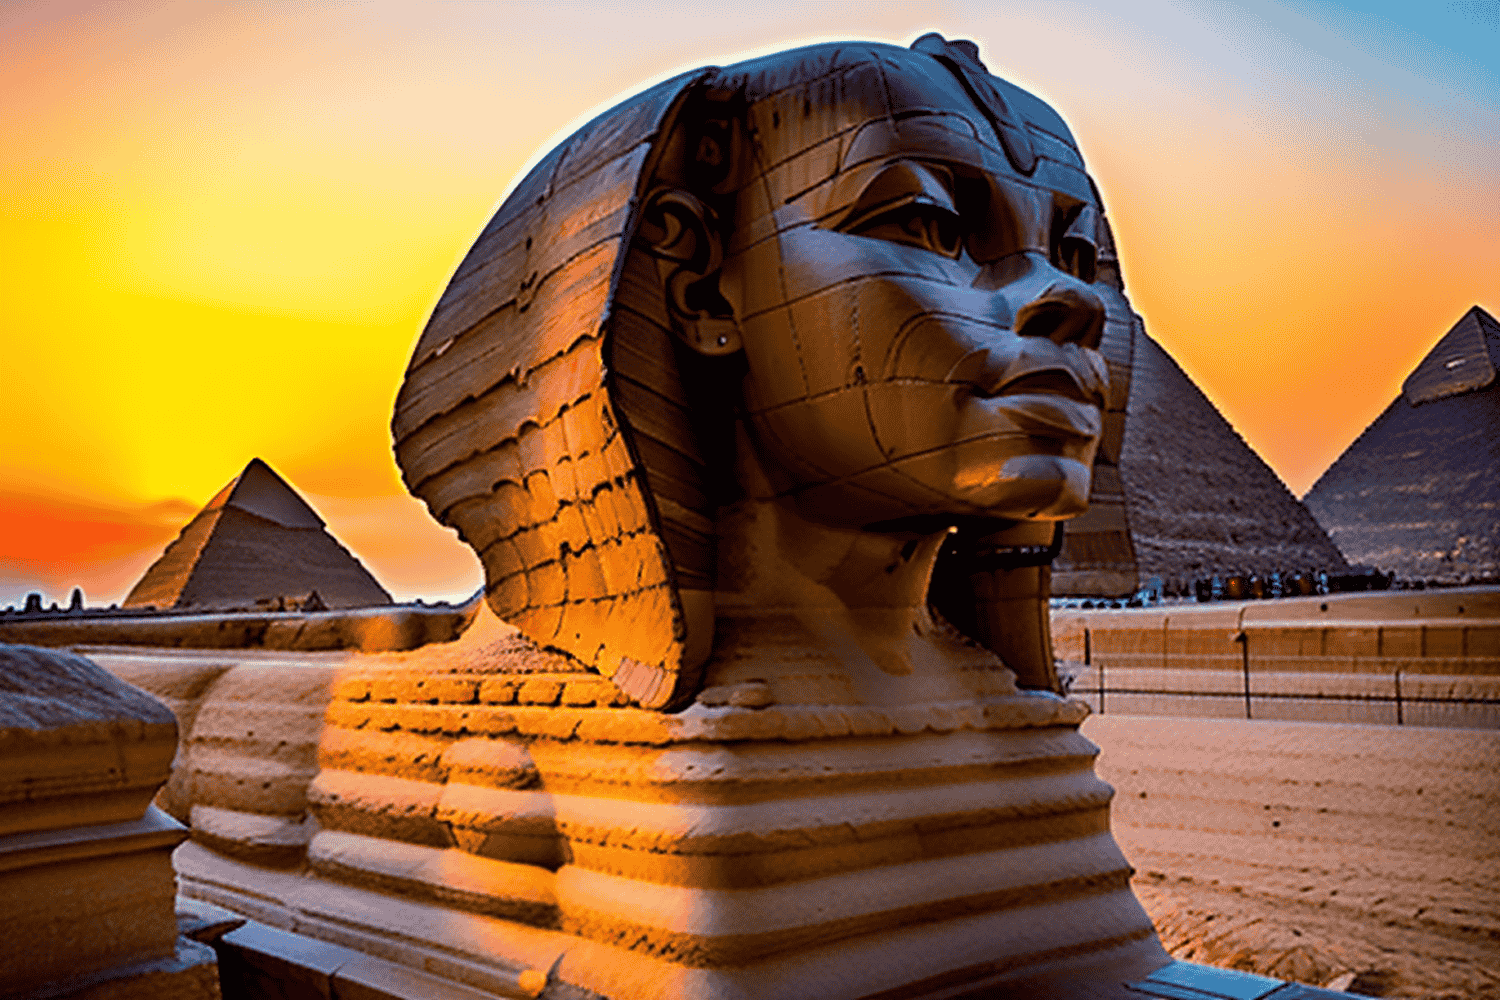 Information about Egypt